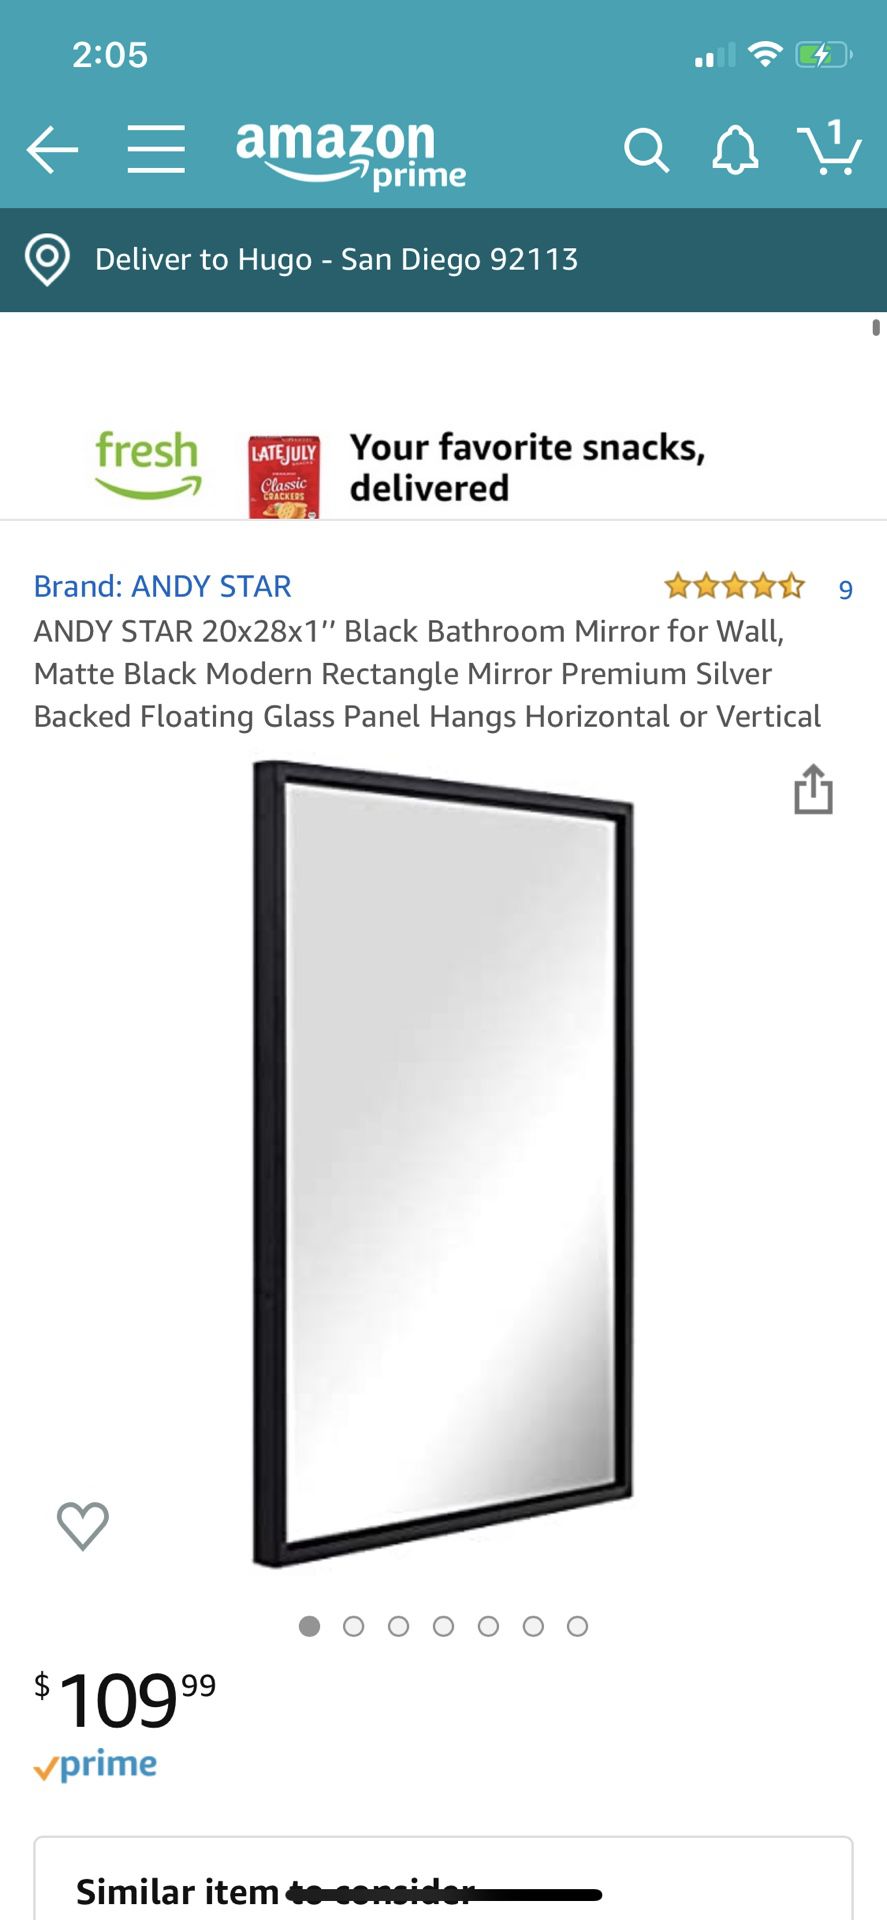 ANDY STAR 20x28x1’’ Black Bathroom Mirror for Wall, Matte Black Modern Rectangle Mirror Premium Silver Backed Floating Glass Panel Hangs Horizontal o